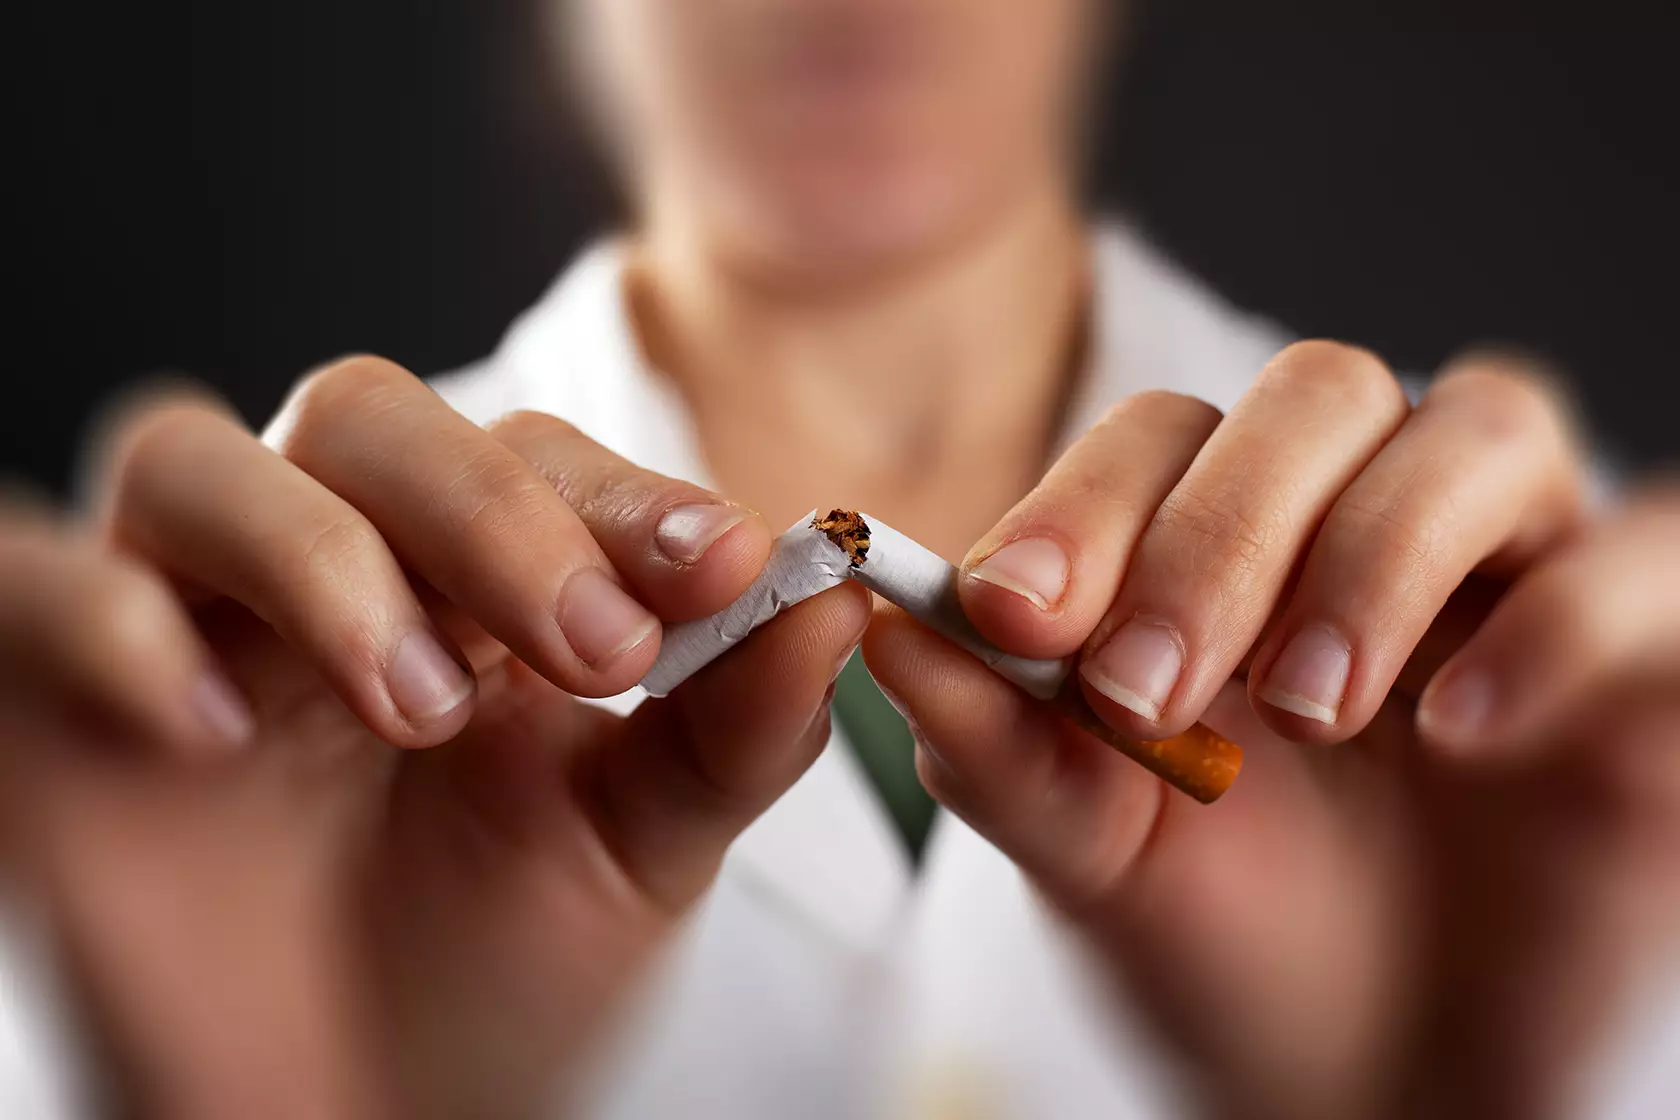 What Are the Health Harms of Smoking?